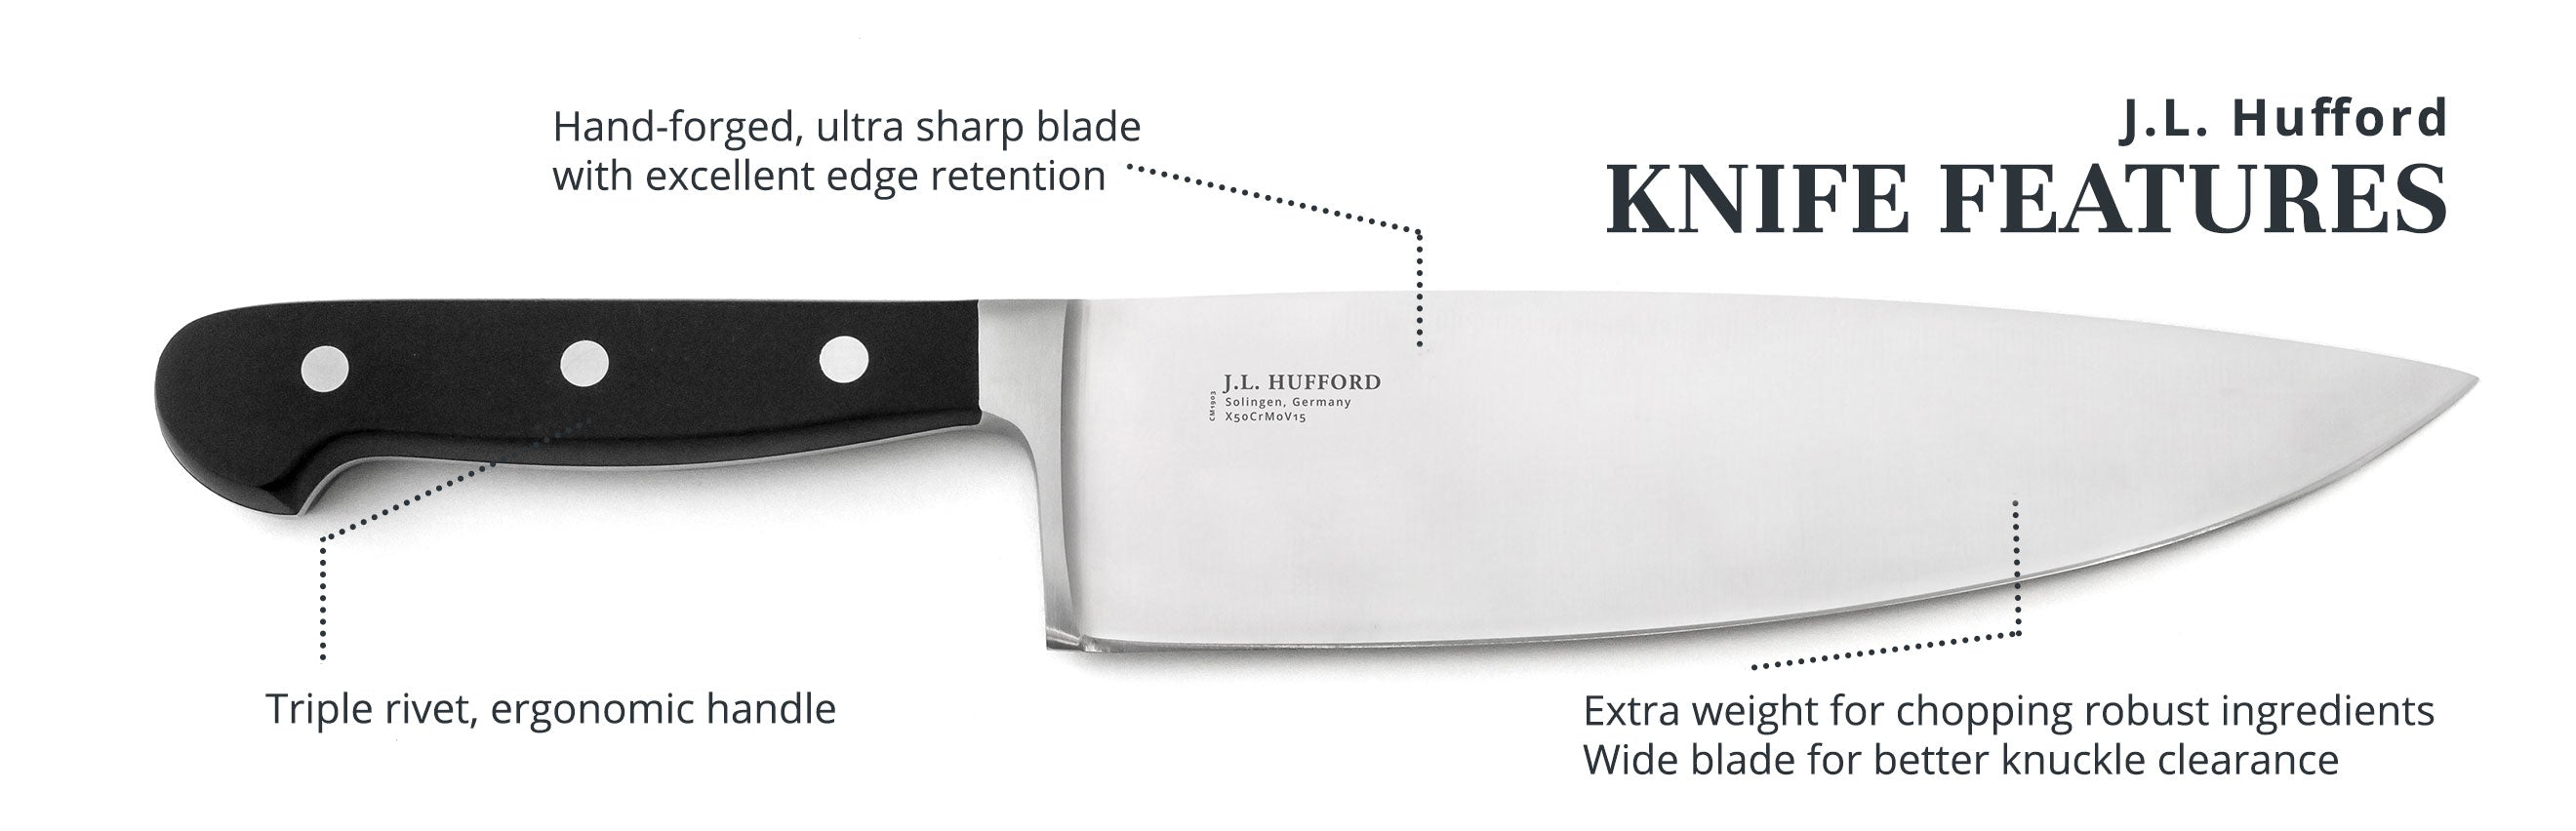 J.L. Hufford Knife Line Features